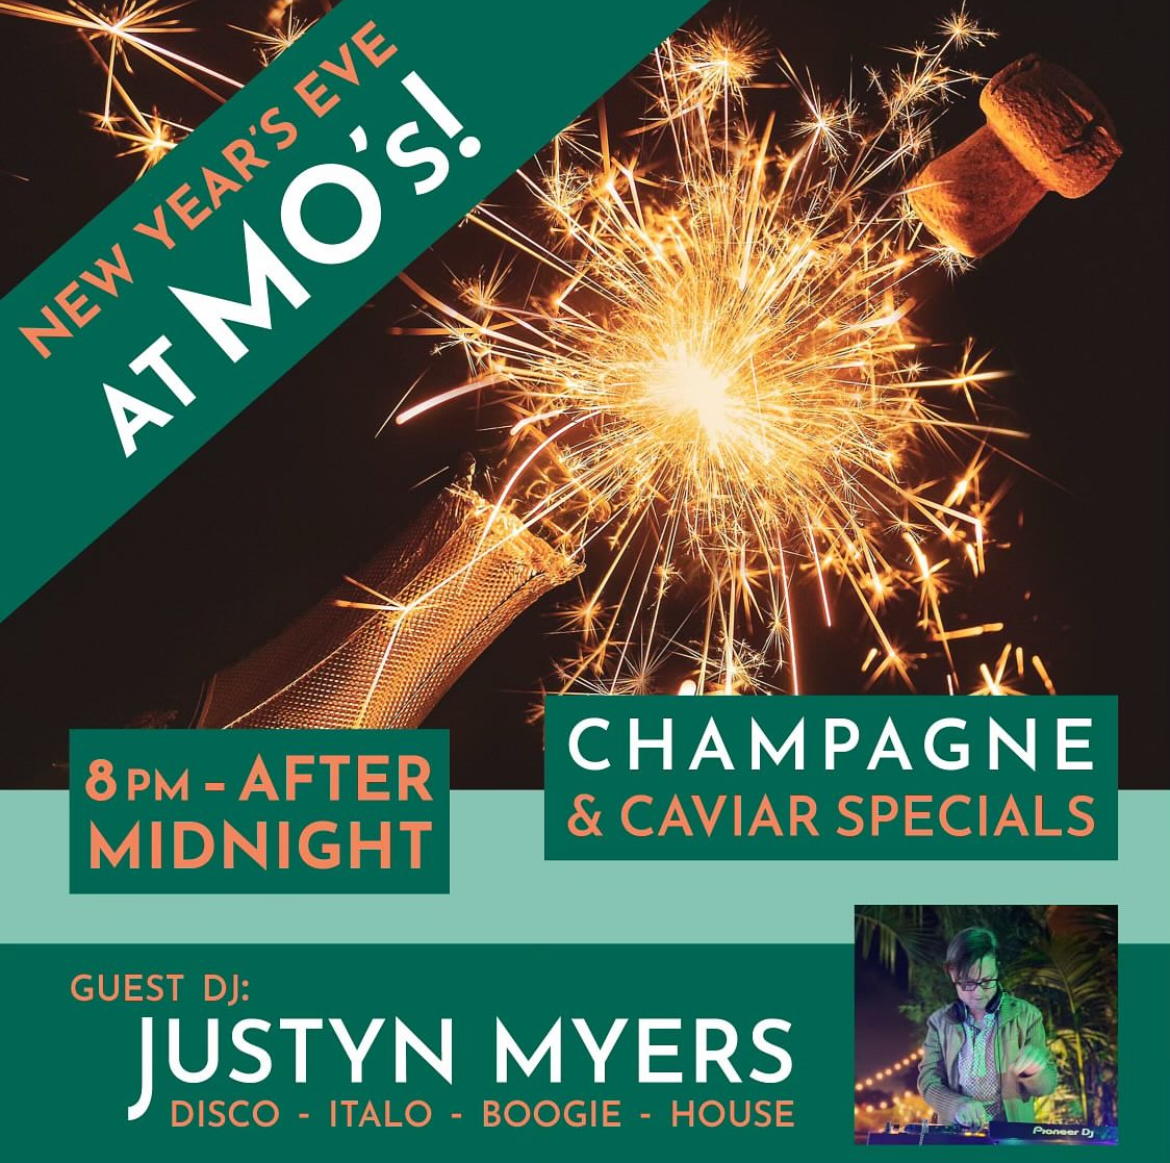 New Year's Eve @ MO's!